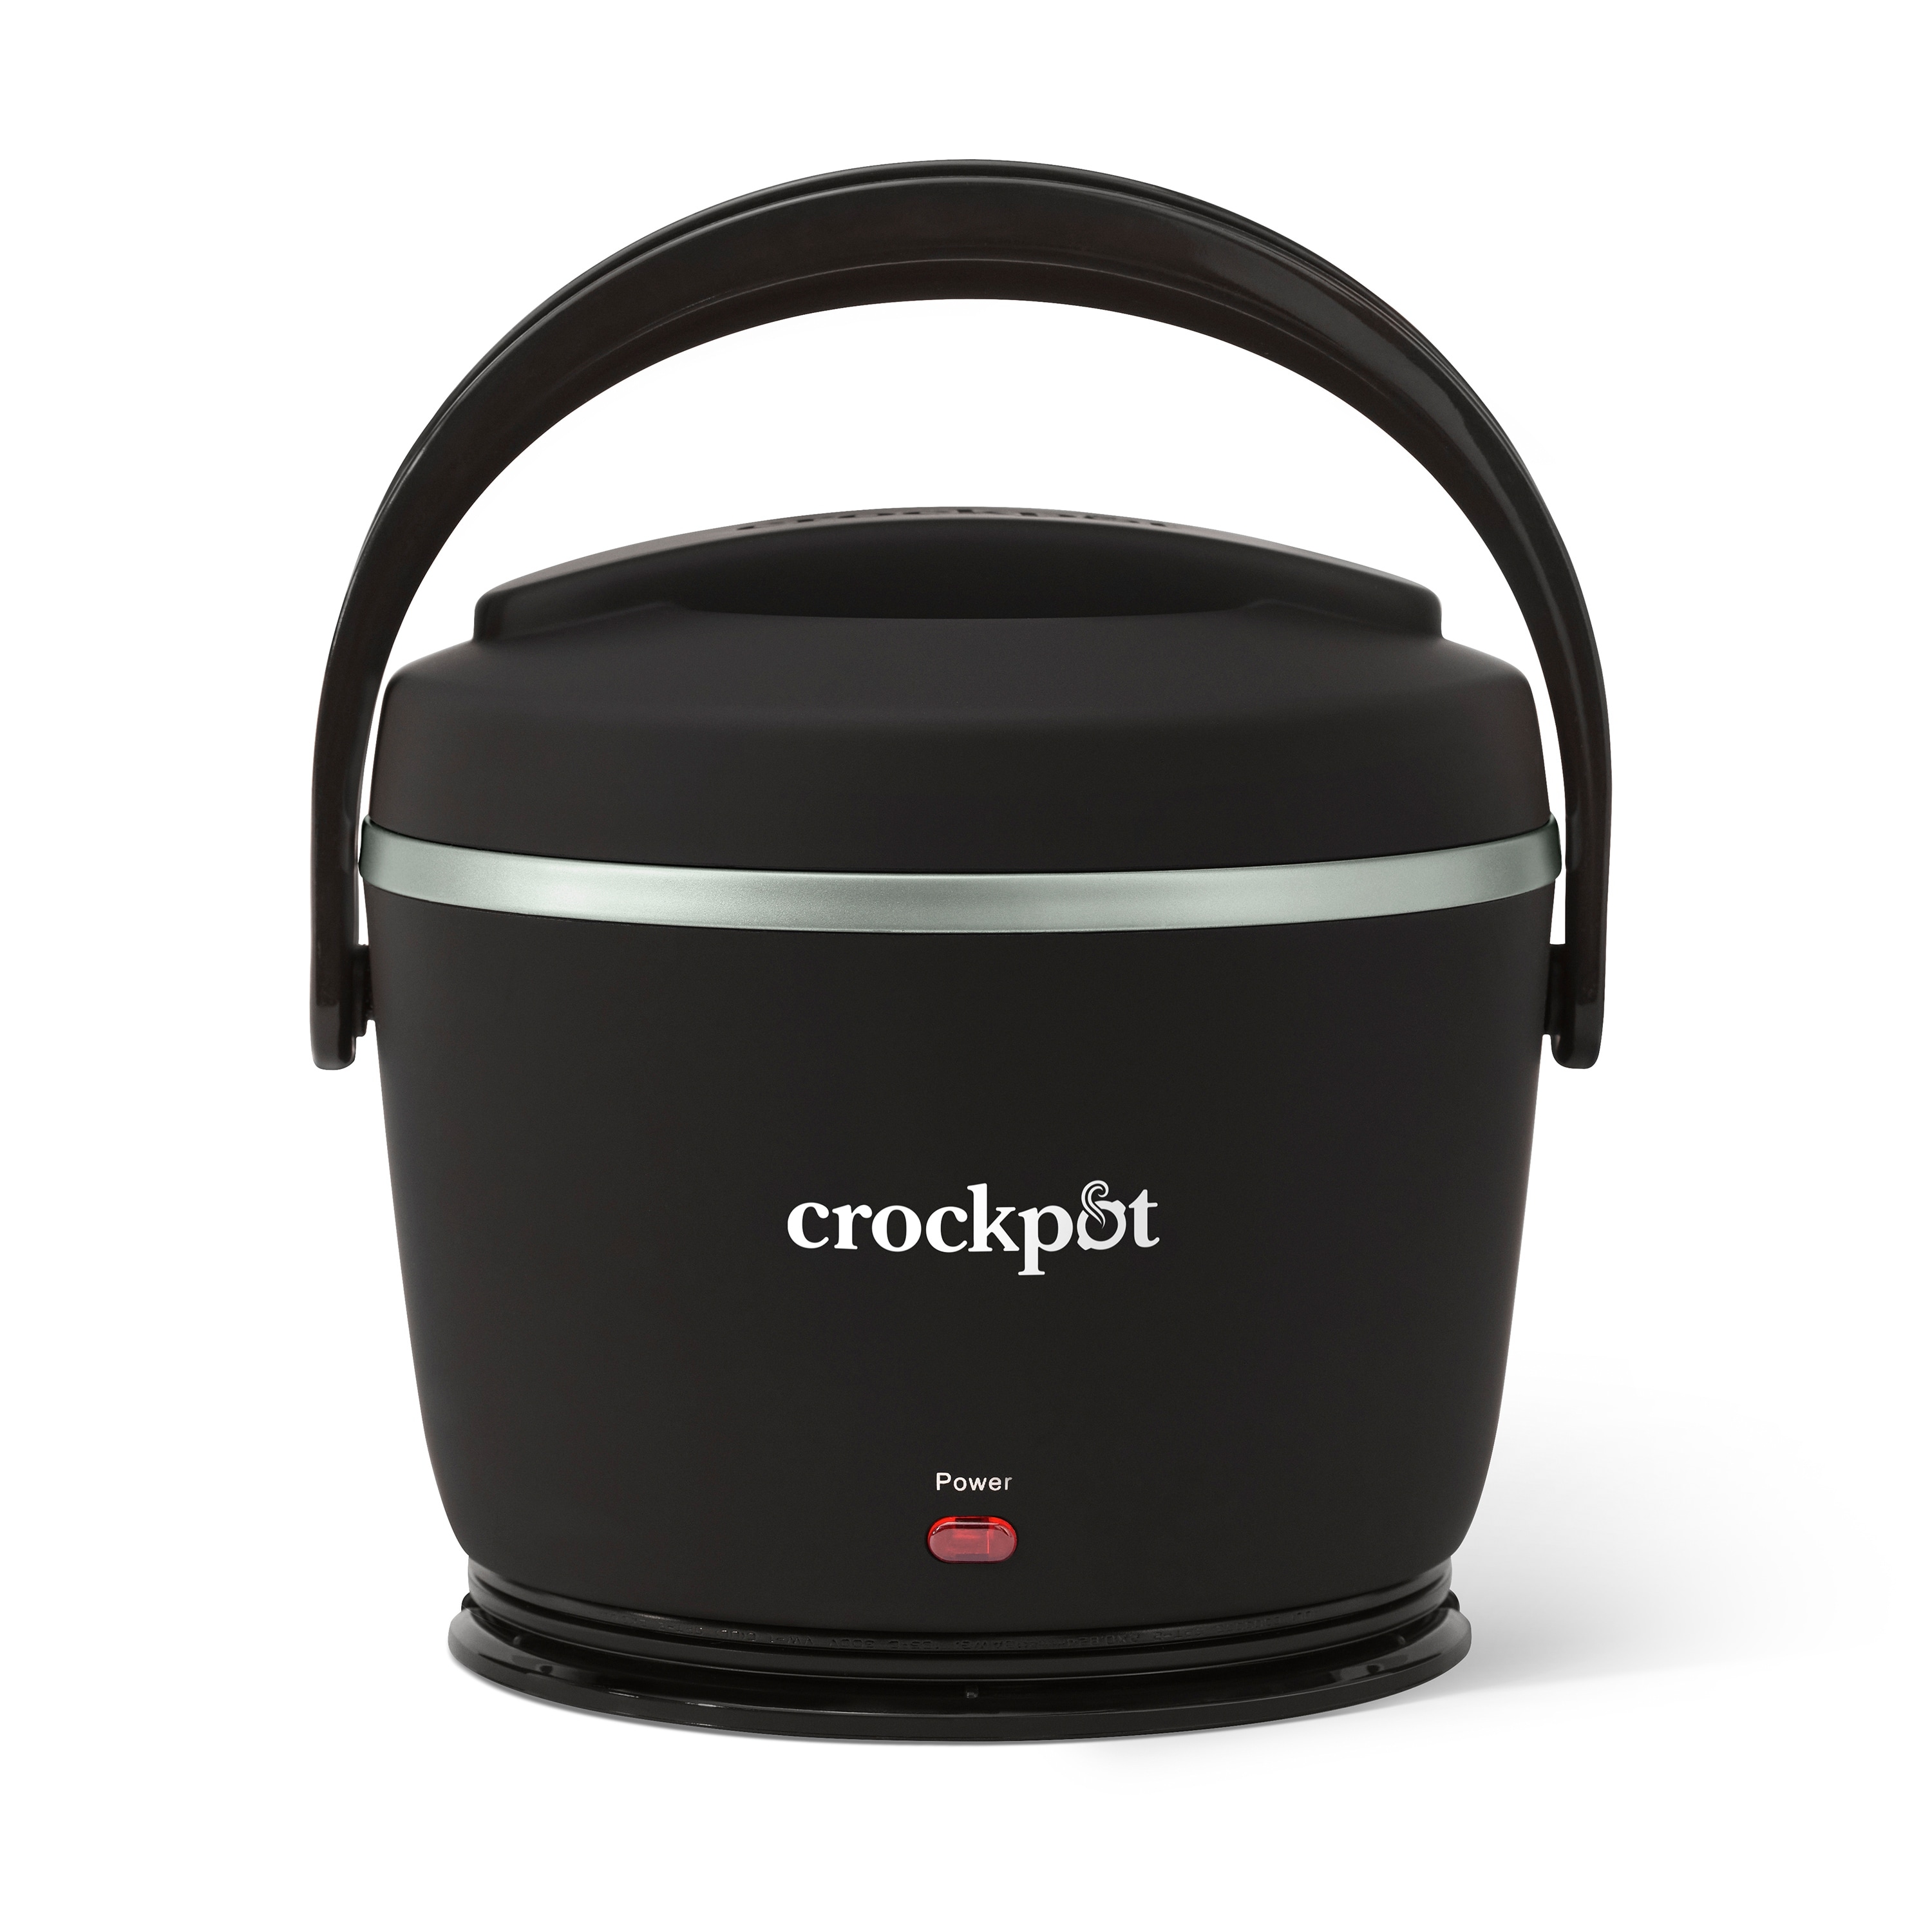 https://ak1.ostkcdn.com/images/products/is/images/direct/30b2859ad61adcdcdd518217d37c44f2a5b5730e/Crockpot-20-oz-Lunch-Crock-Food-Warmer-Heated-Lunch-Box-Black-Licorice.jpg